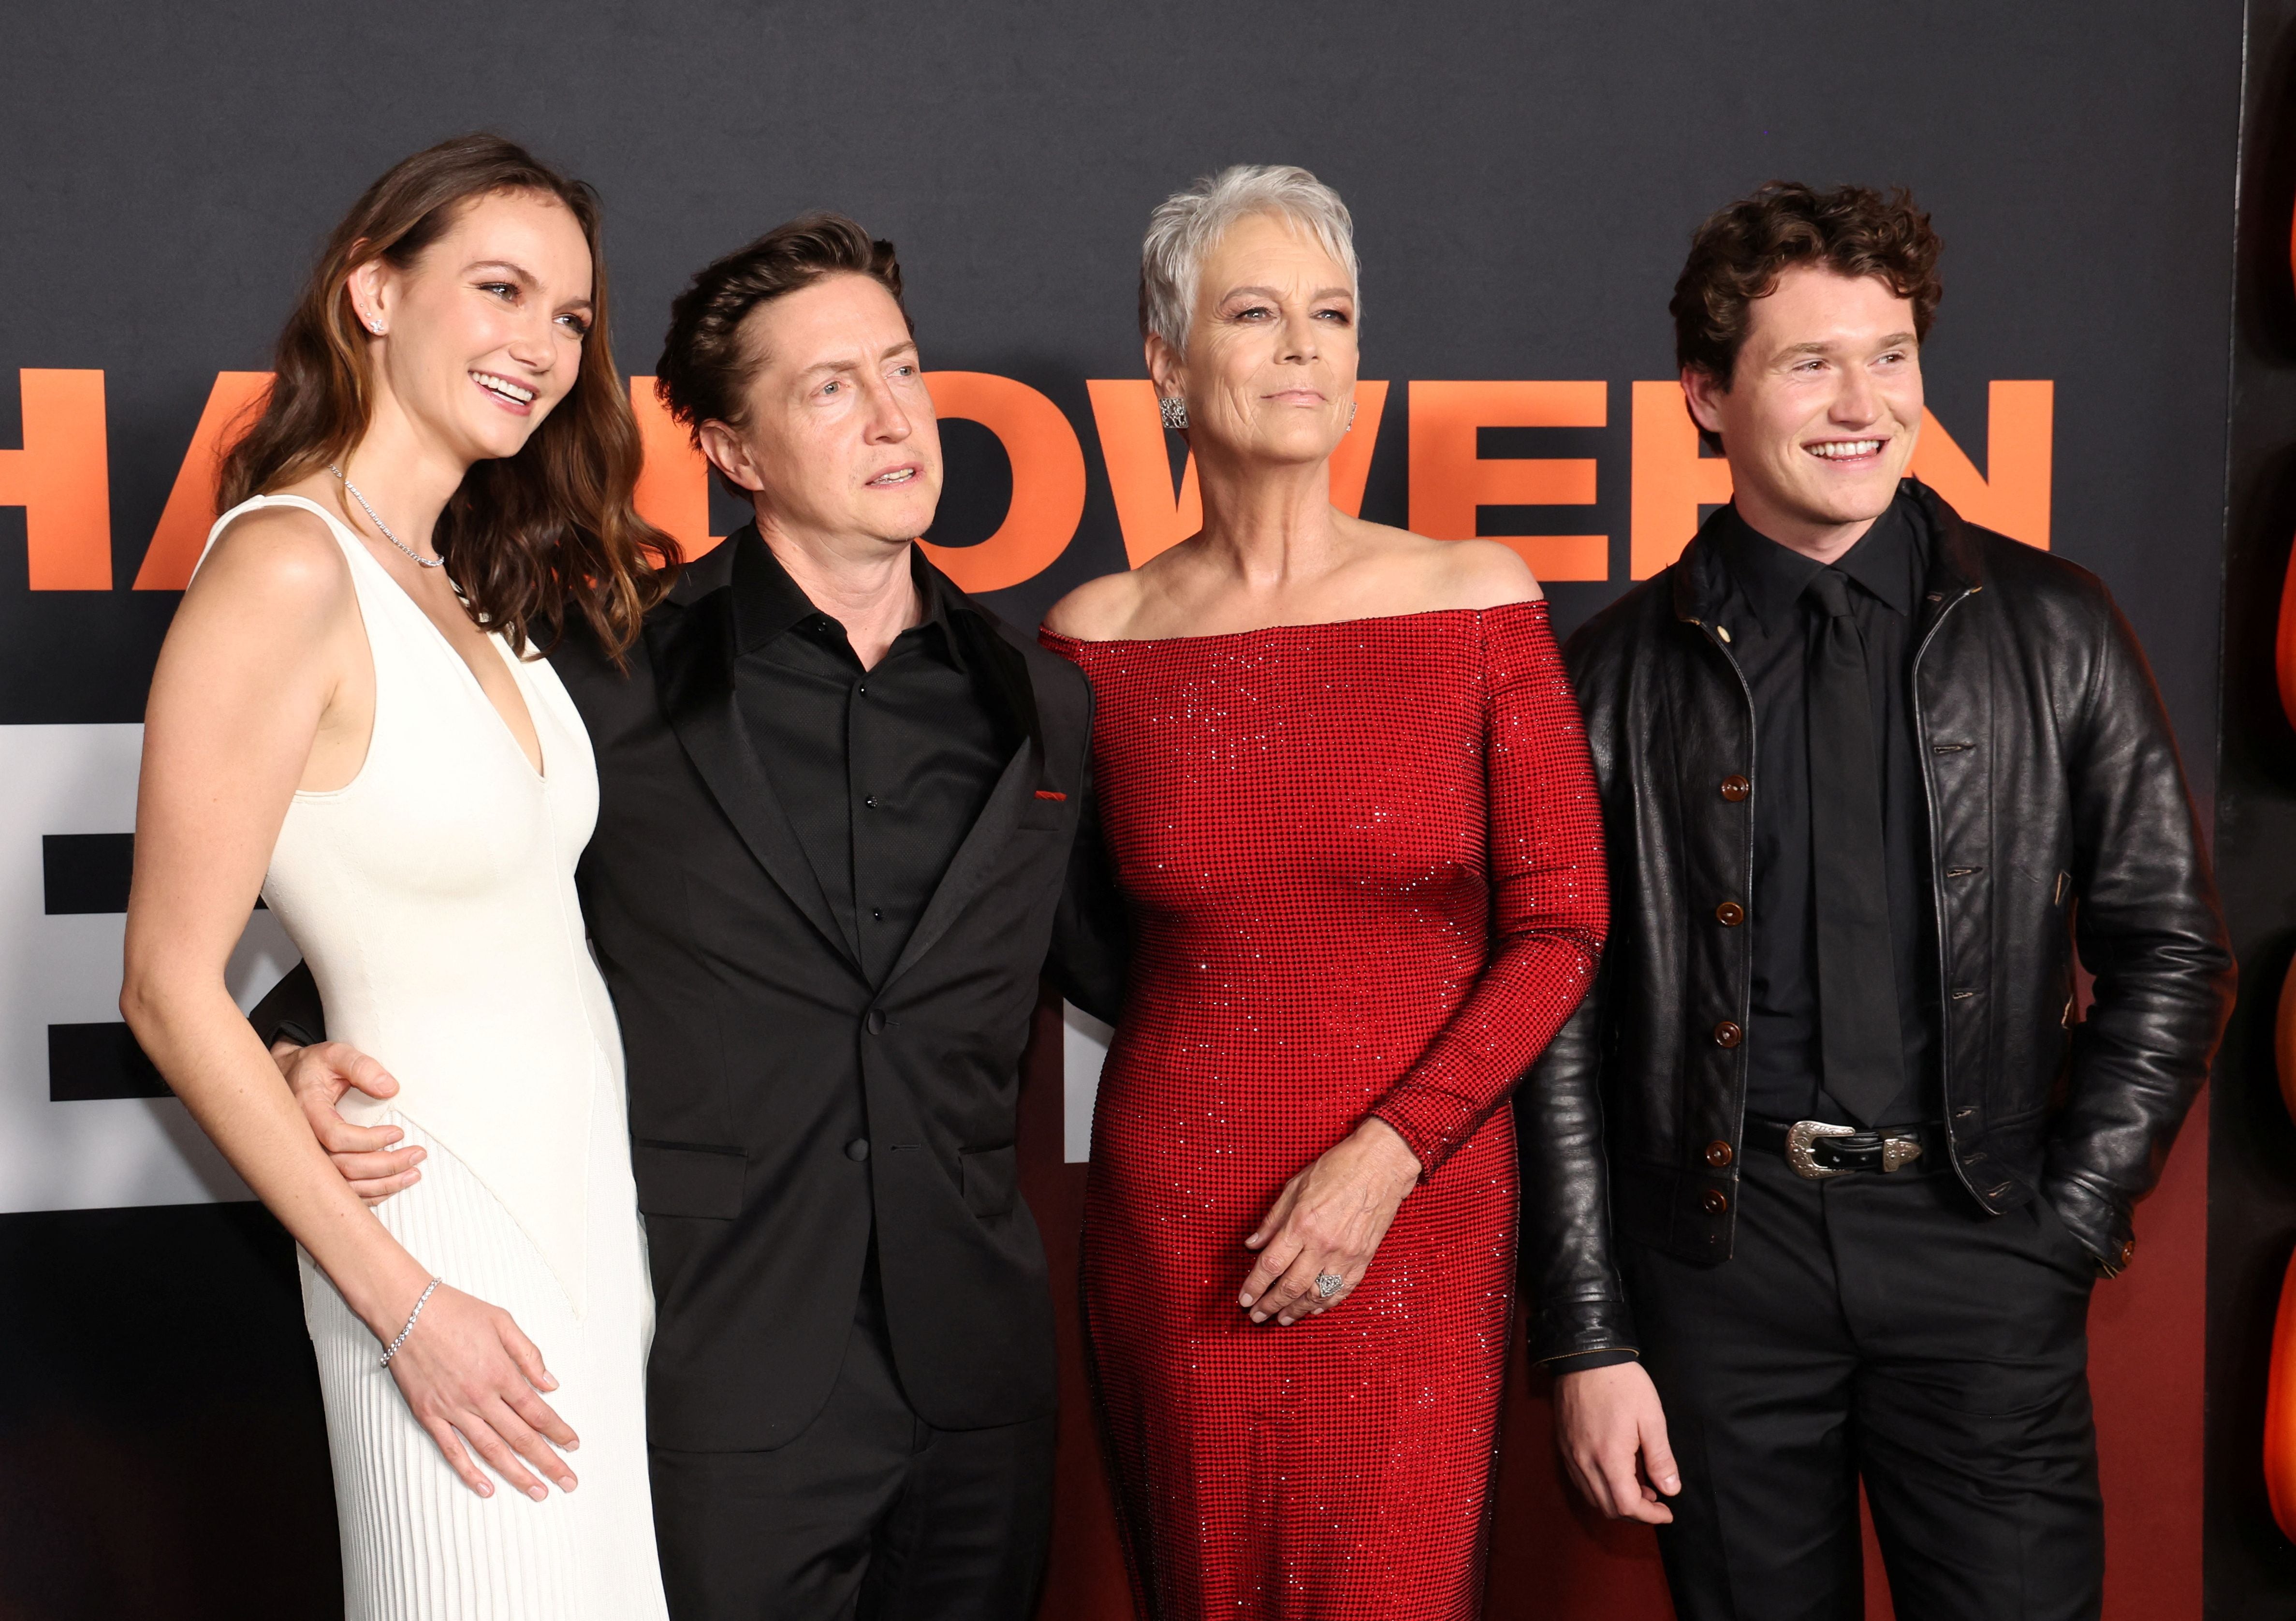 Director David Gordon Green and cast members Jamie Lee Curtis, Rohan Campbell and Andi Matichak attend a premiere for the film "Halloween Ends" in Los Angeles, California, U.S., October 11, 2022. REUTERS/Mario Anzuoni